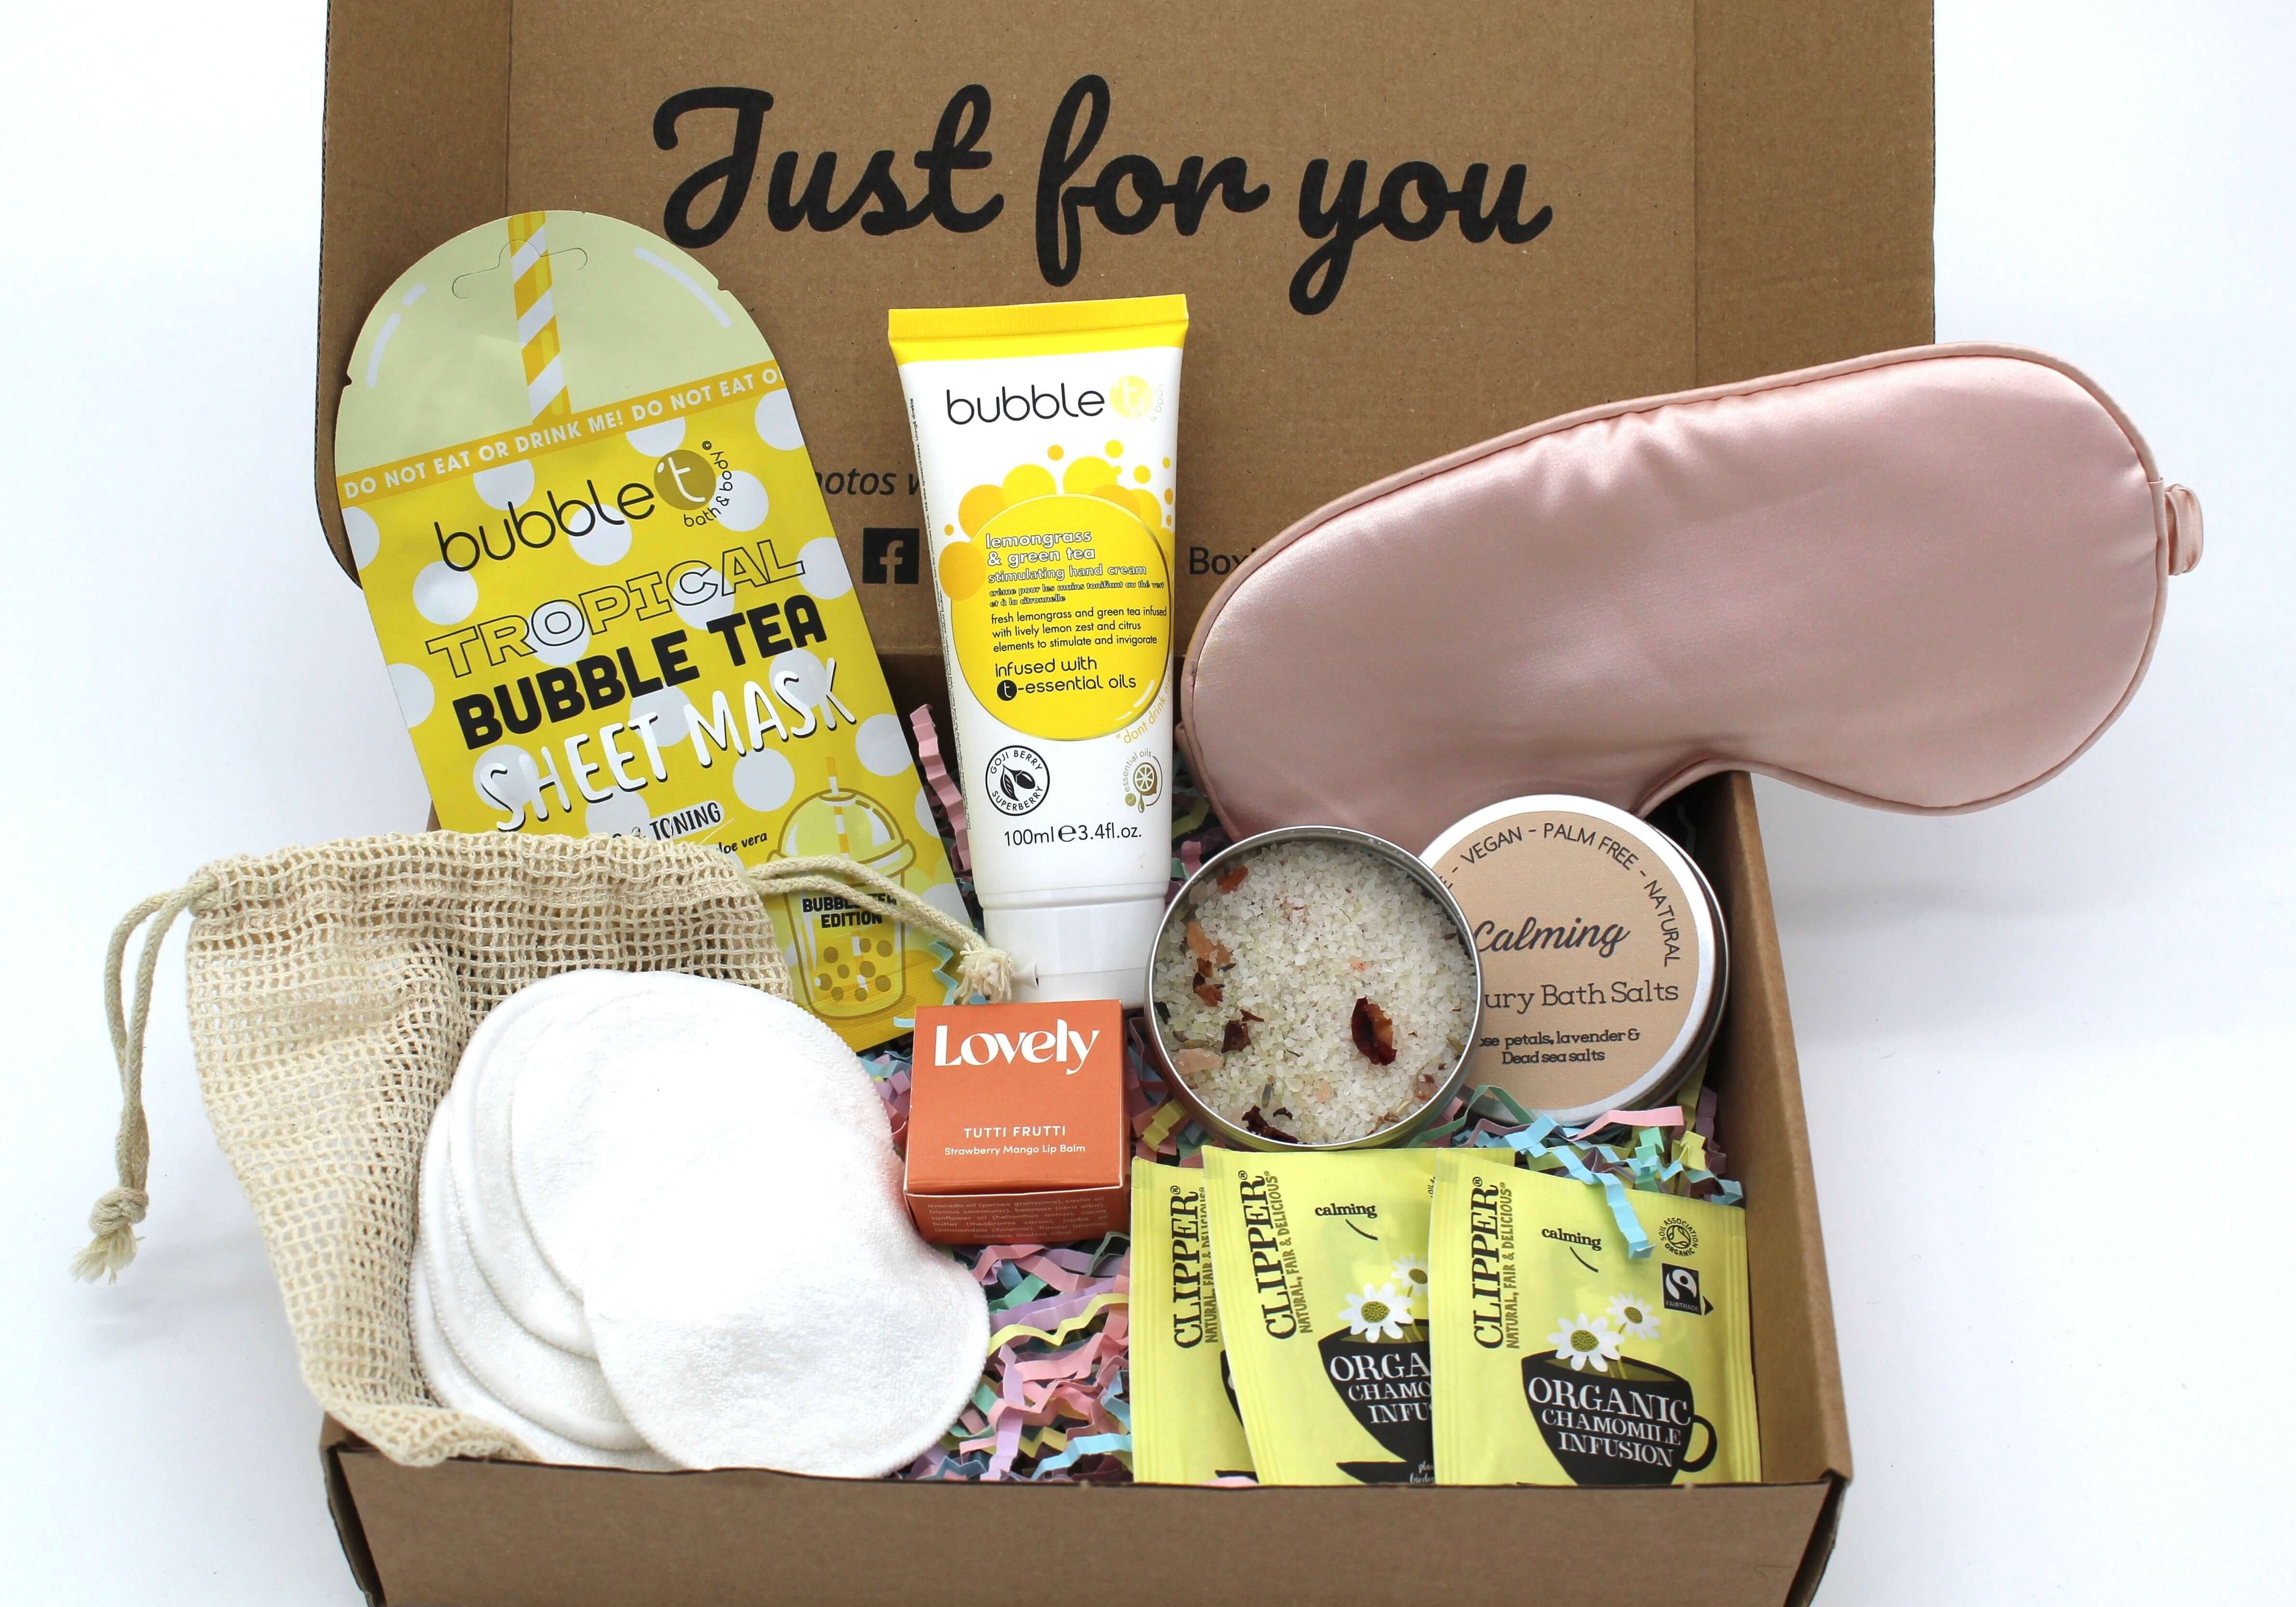 Spa treat at home with girls night in, this gift is packed with everything she will need to unwind and relaxing. Including luxury calming bath salts, 5 reusable face cloths, hand cream, sheet face mask, sleep eye mask, luxurious lip balm and 3 individually wrapped teabags.